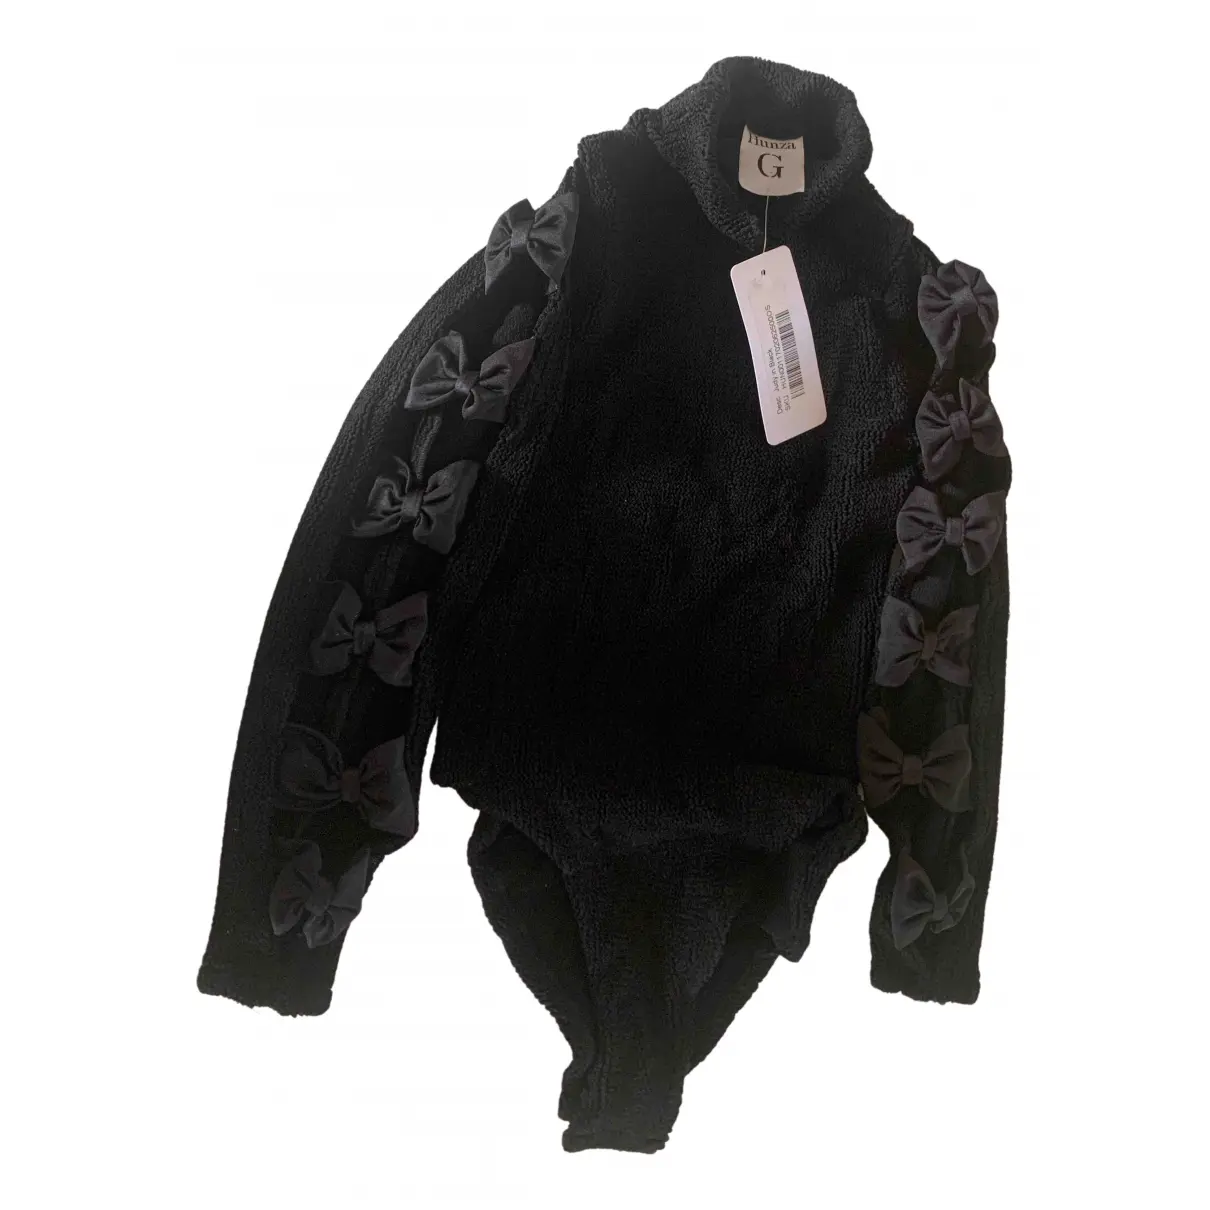 Black Synthetic Top HUNZA G